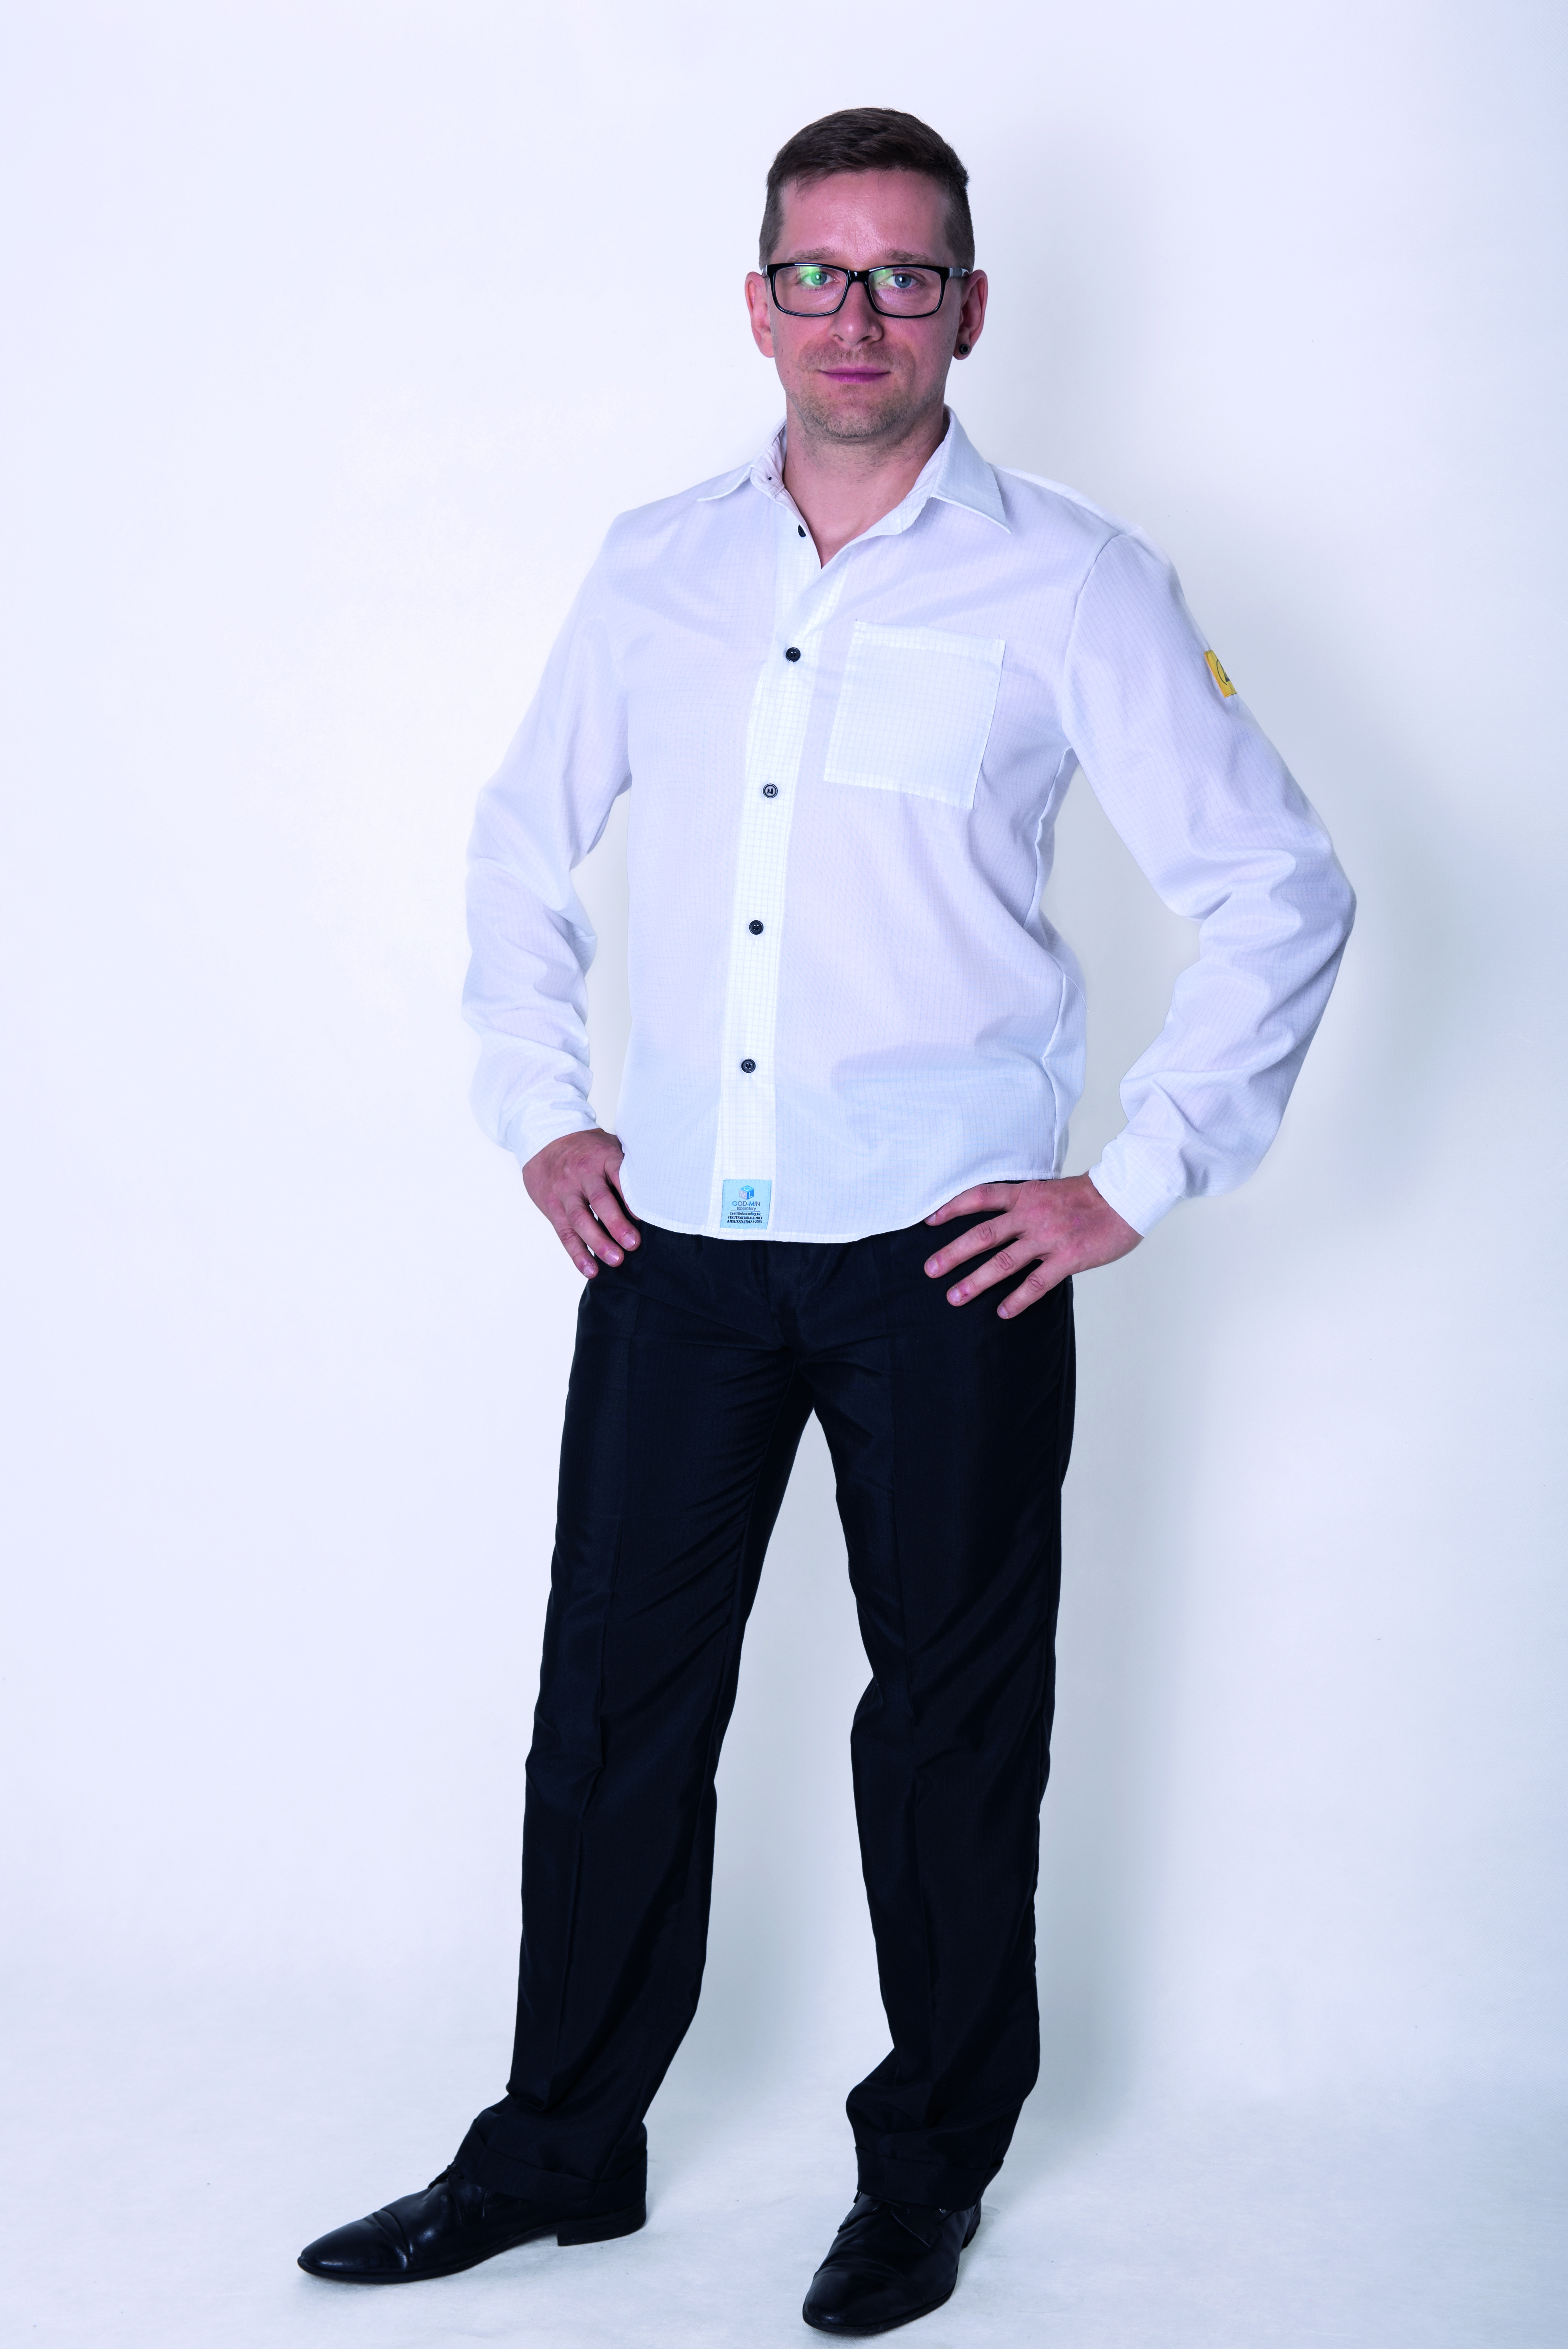 ESD Oxford Shirts Unisex Business ING White Shirts With Long Sleeves & Breast Pocket CR10 Fabric